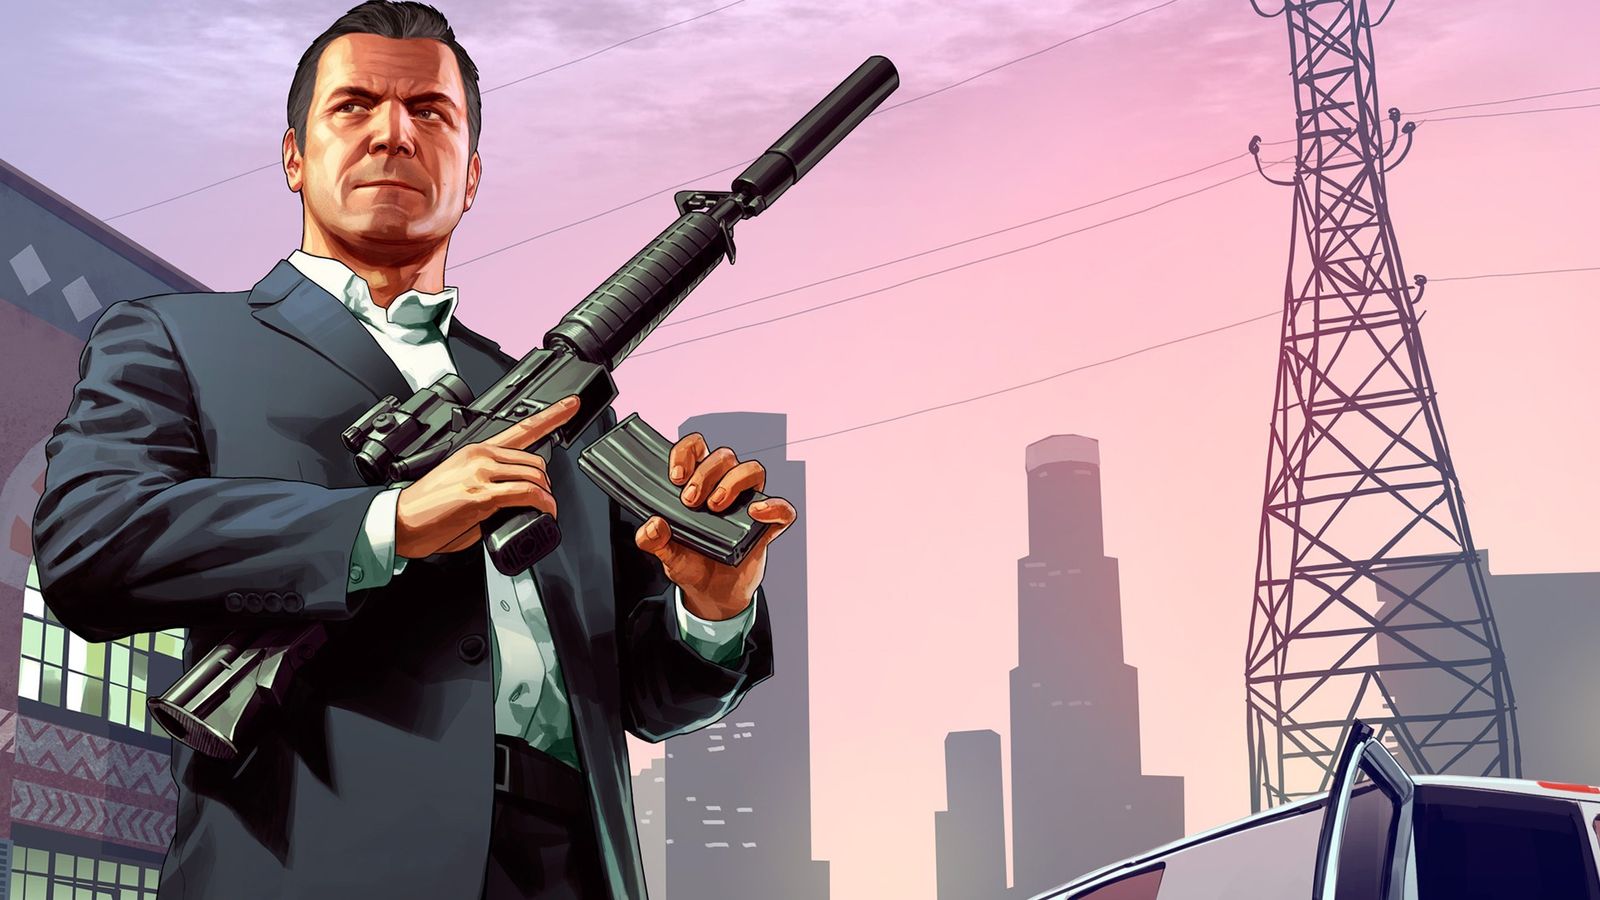 A promotional image for GTA 5 featuring the character of Micheal.